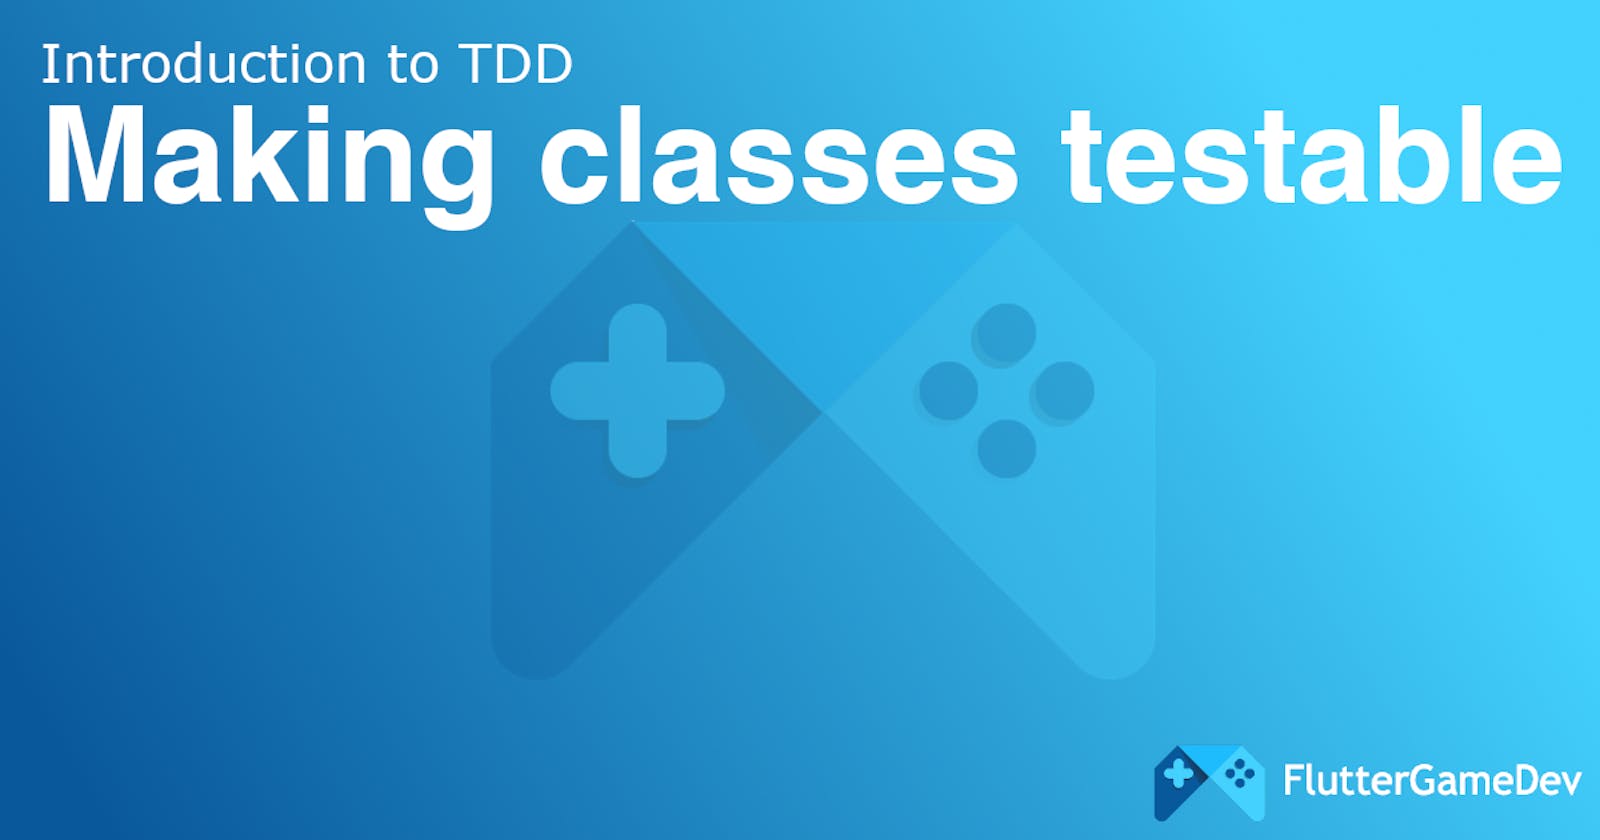 Making classes testable